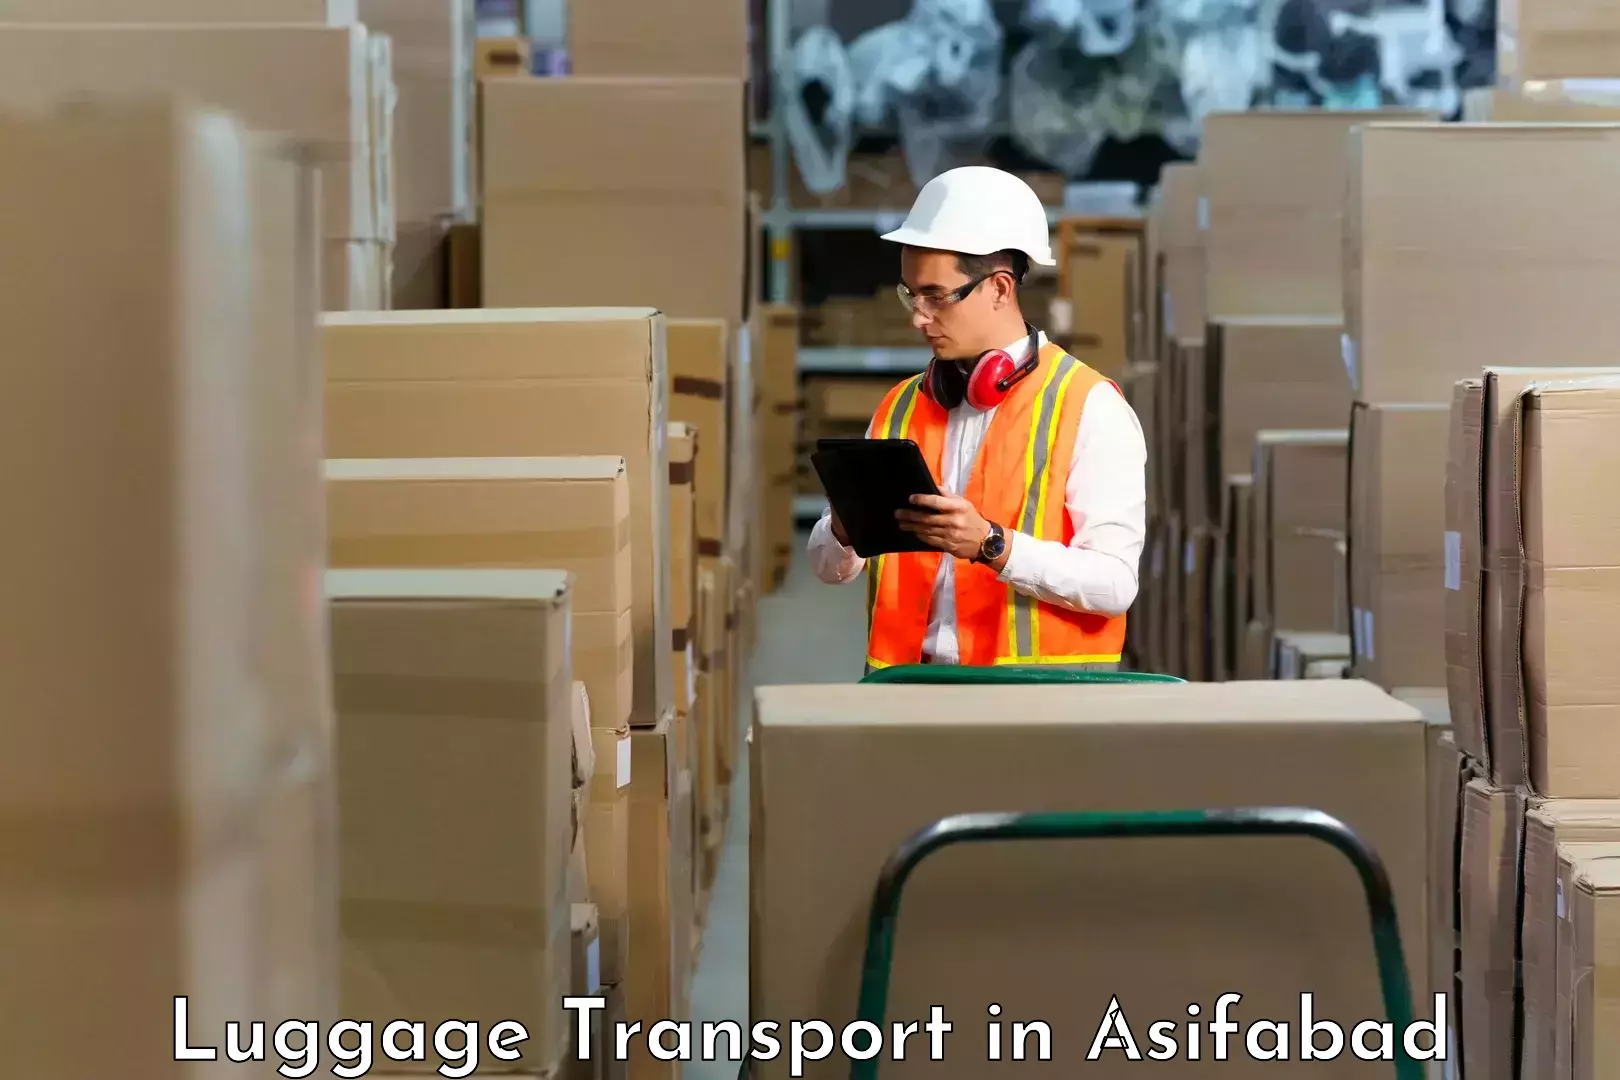 Baggage shipping experience in Asifabad